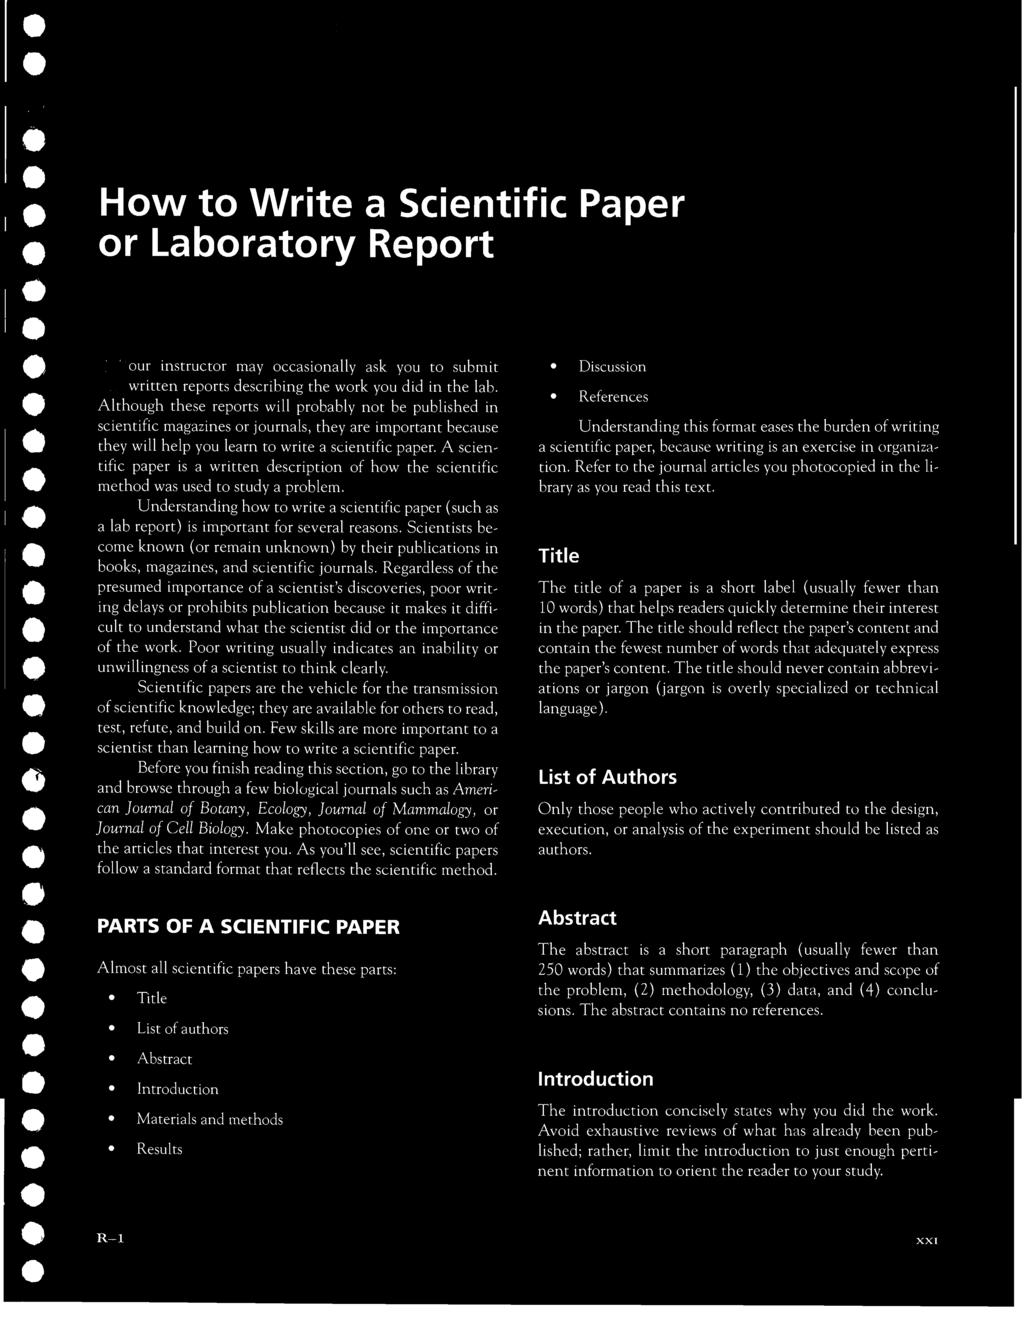 Although these reports will probably not be published in scientific magazines or journals, they are important because they will help you learn to write a scientific paper.